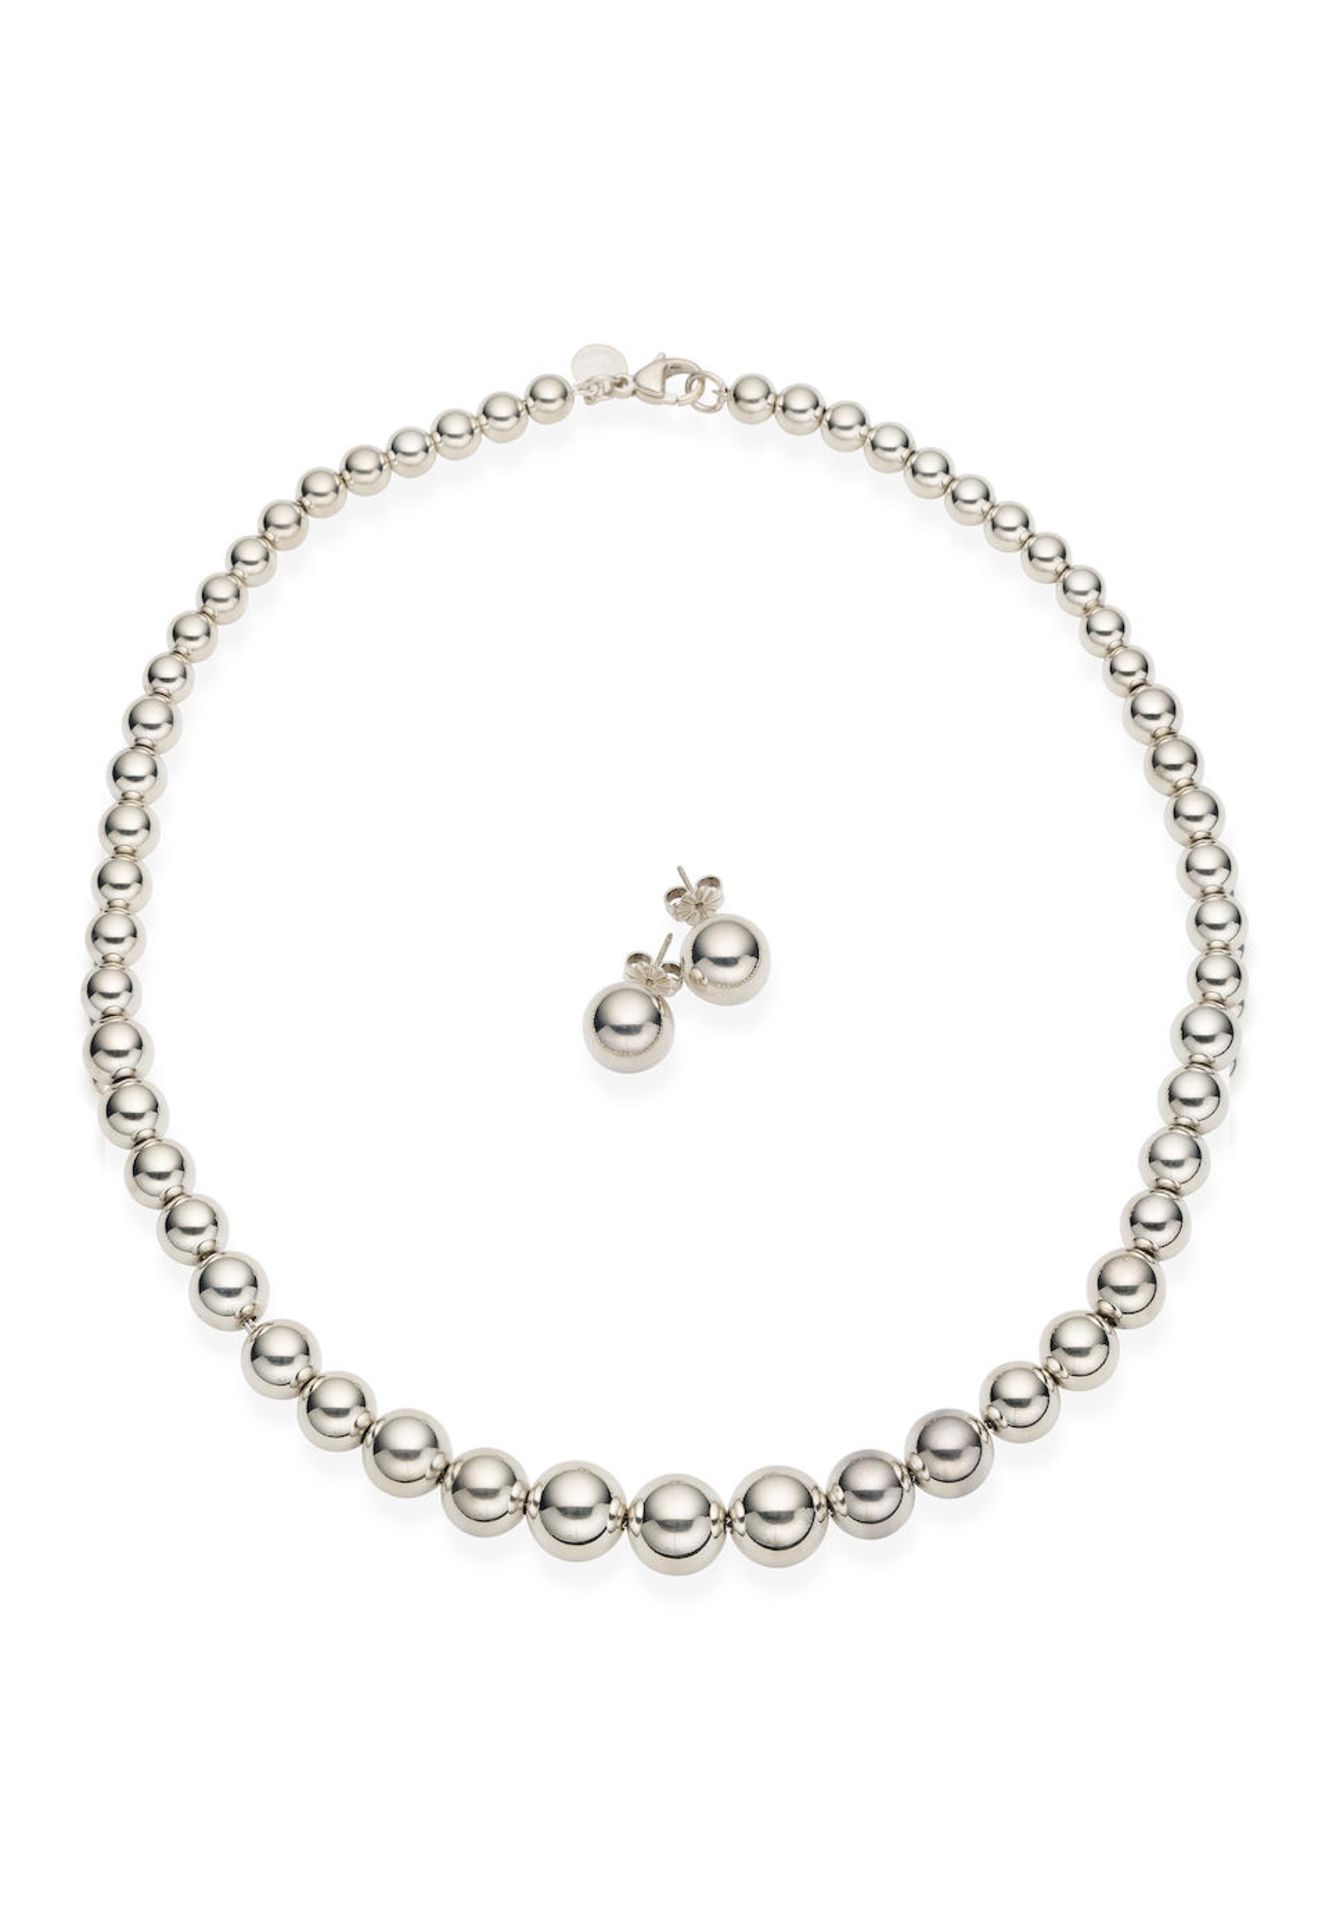 TIFFANY & CO. | STERLING SILVER 'HARDWEAR BALL' NECKLACE AND EARRING SUITE